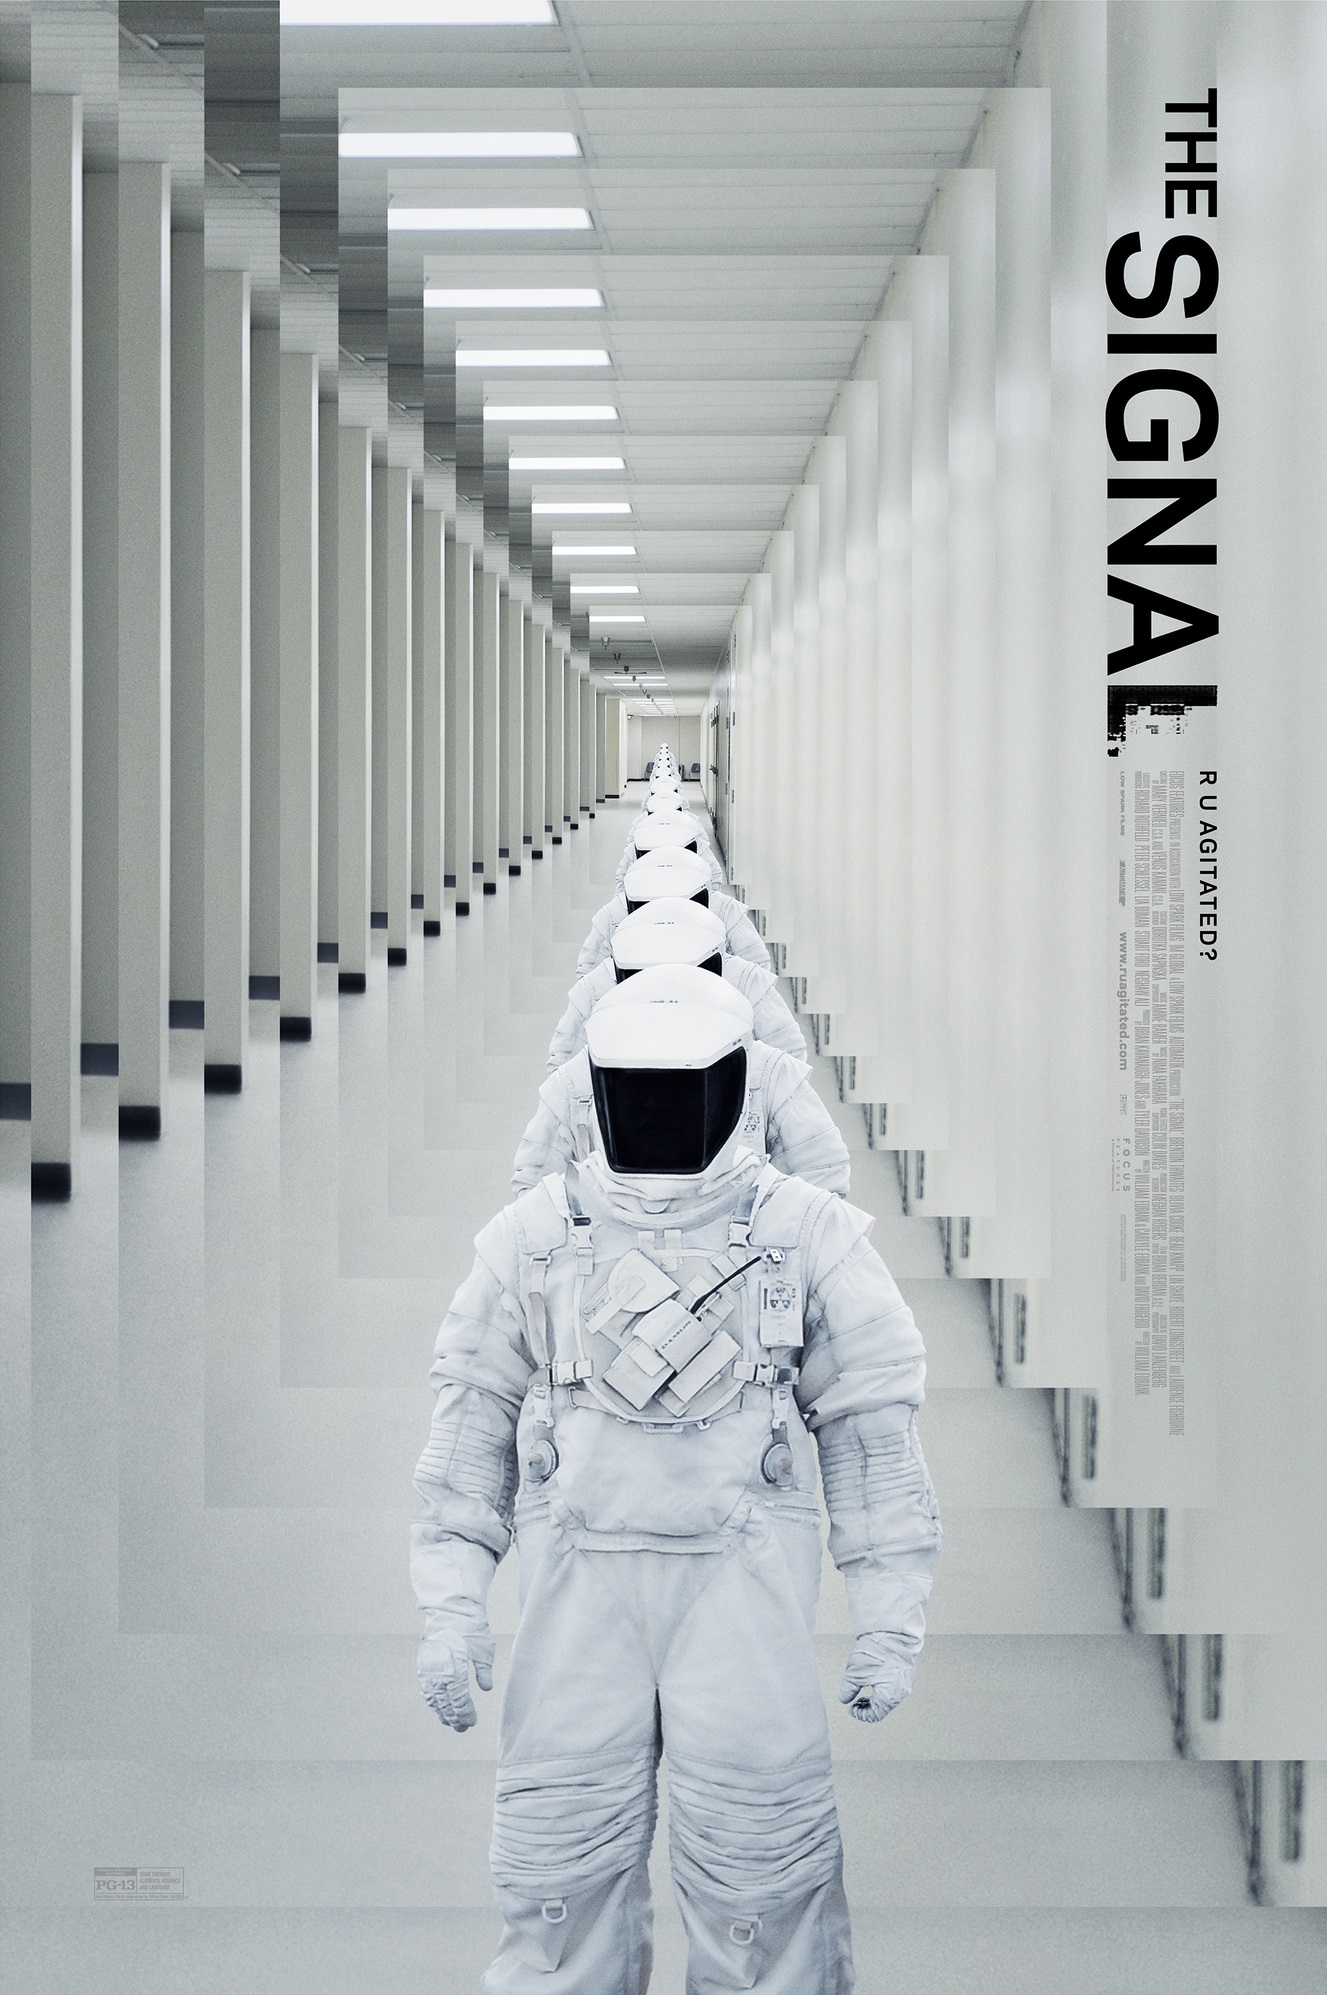 The Signal Main Poster